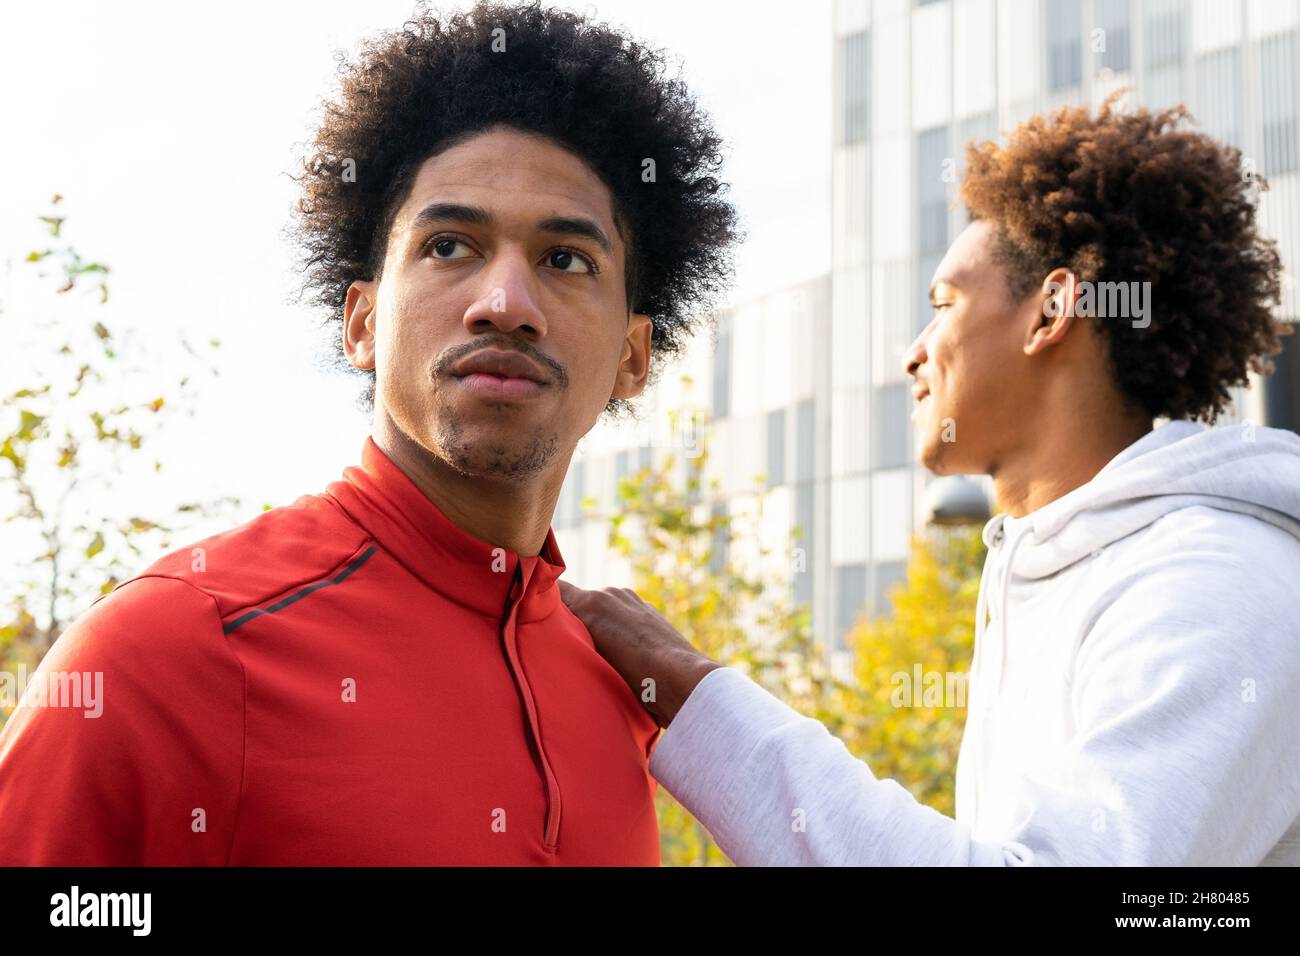 African American man with curly hair putting hand on shoulder of friend on street near building and trees Stock Photo